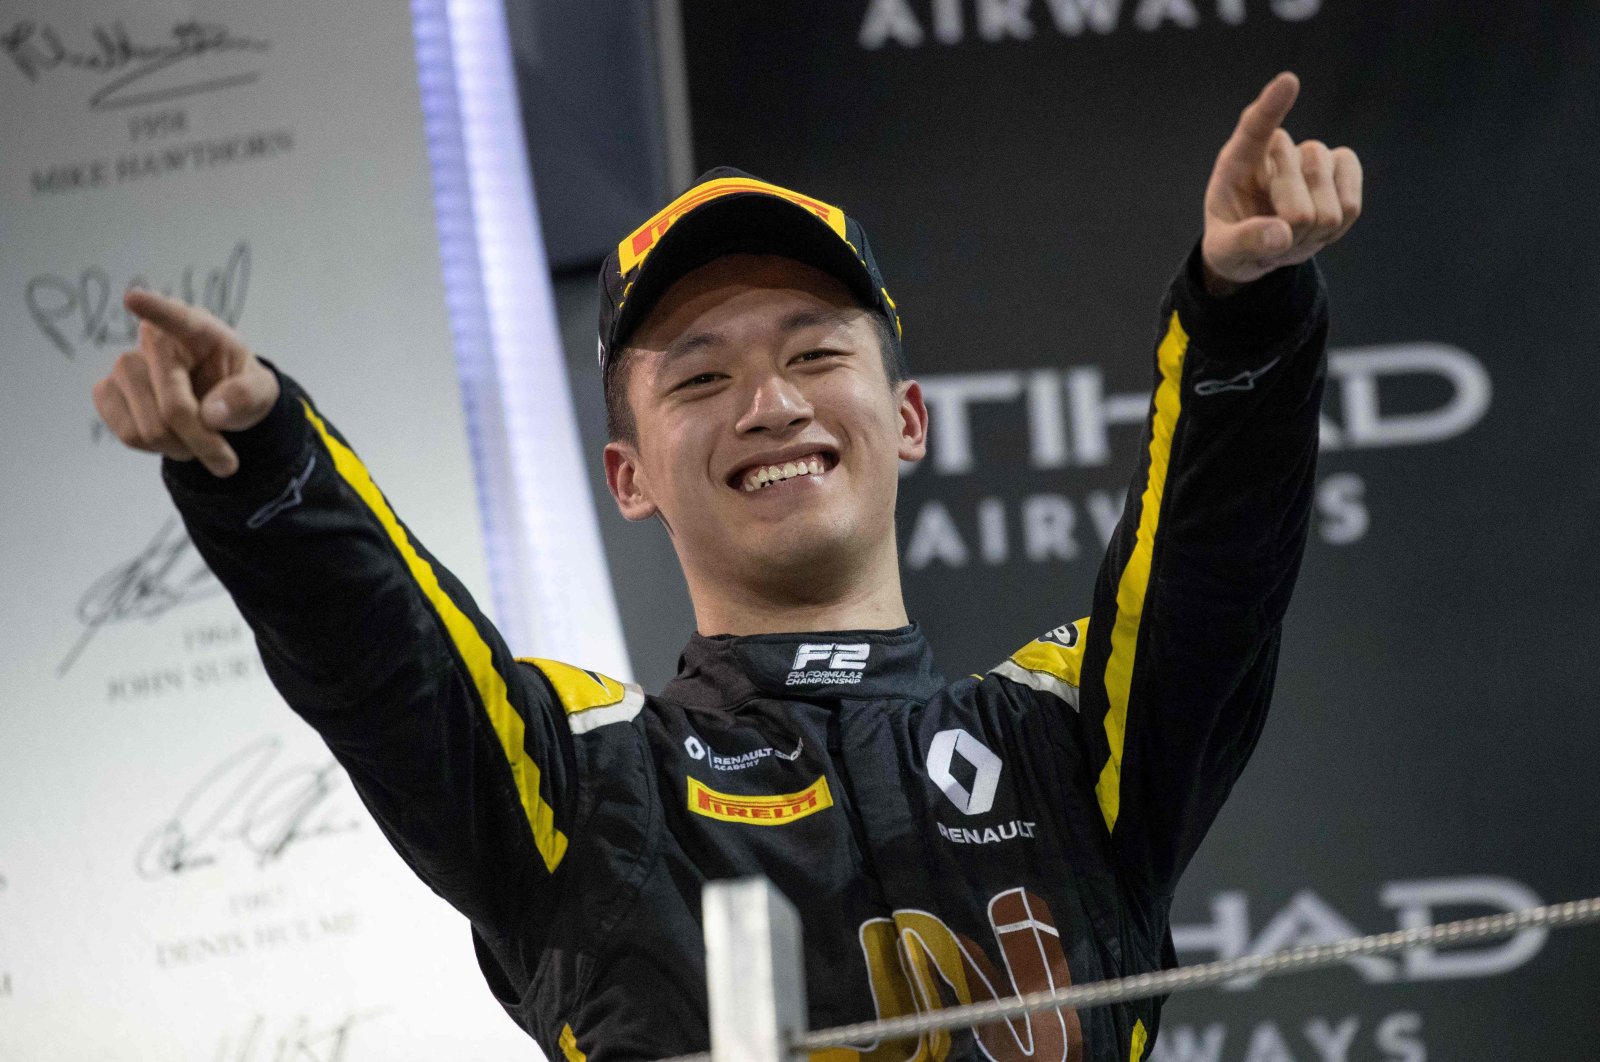 Chinese driver Zhou Guanyu reacting after taking third place at a feature race during the 12th and final round of the 2019 FIA Formula 2 championship at the Yas Marina Circuit in Abu Dhabi, United Arab Emirates (UAE), Nov. 30, 2019. (AFP File Photo)